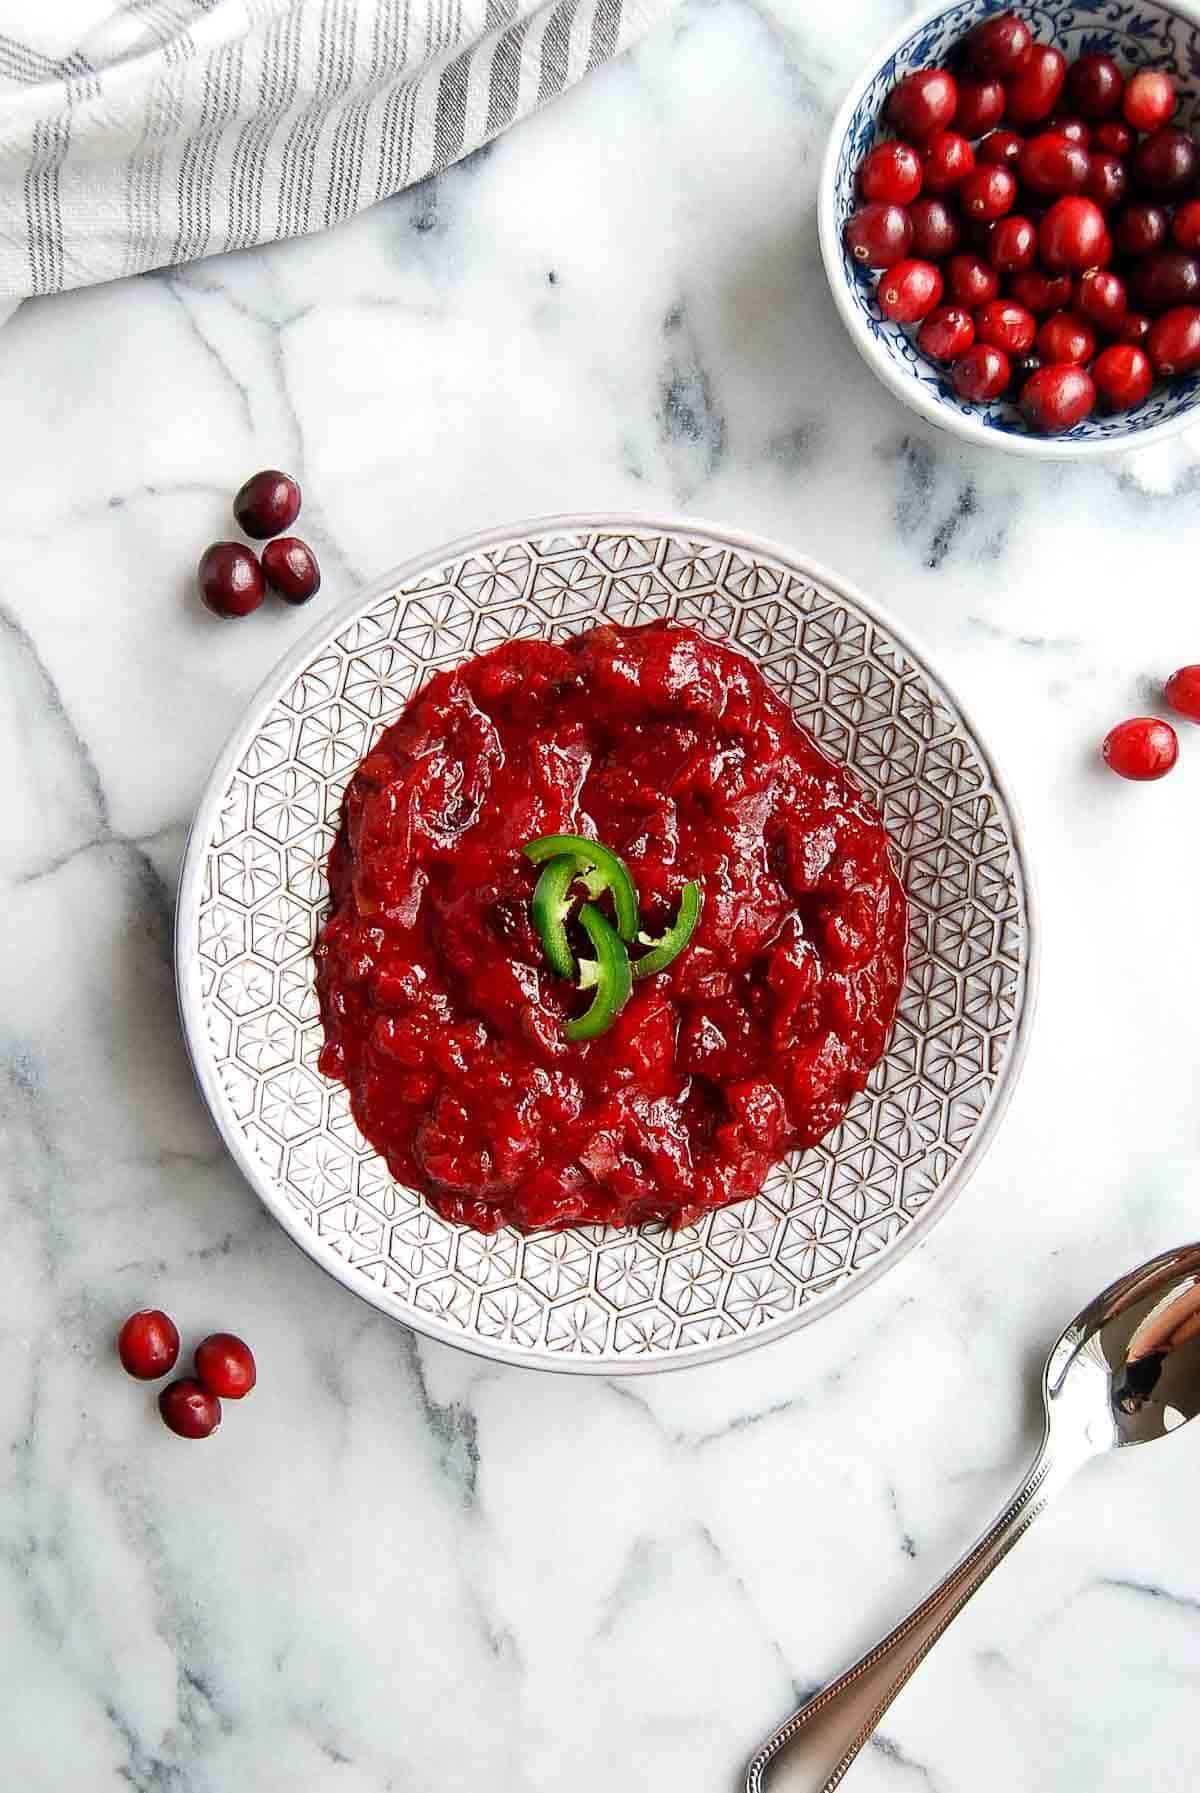 jalapeno cranberry sauce in serving bowl on countertop.